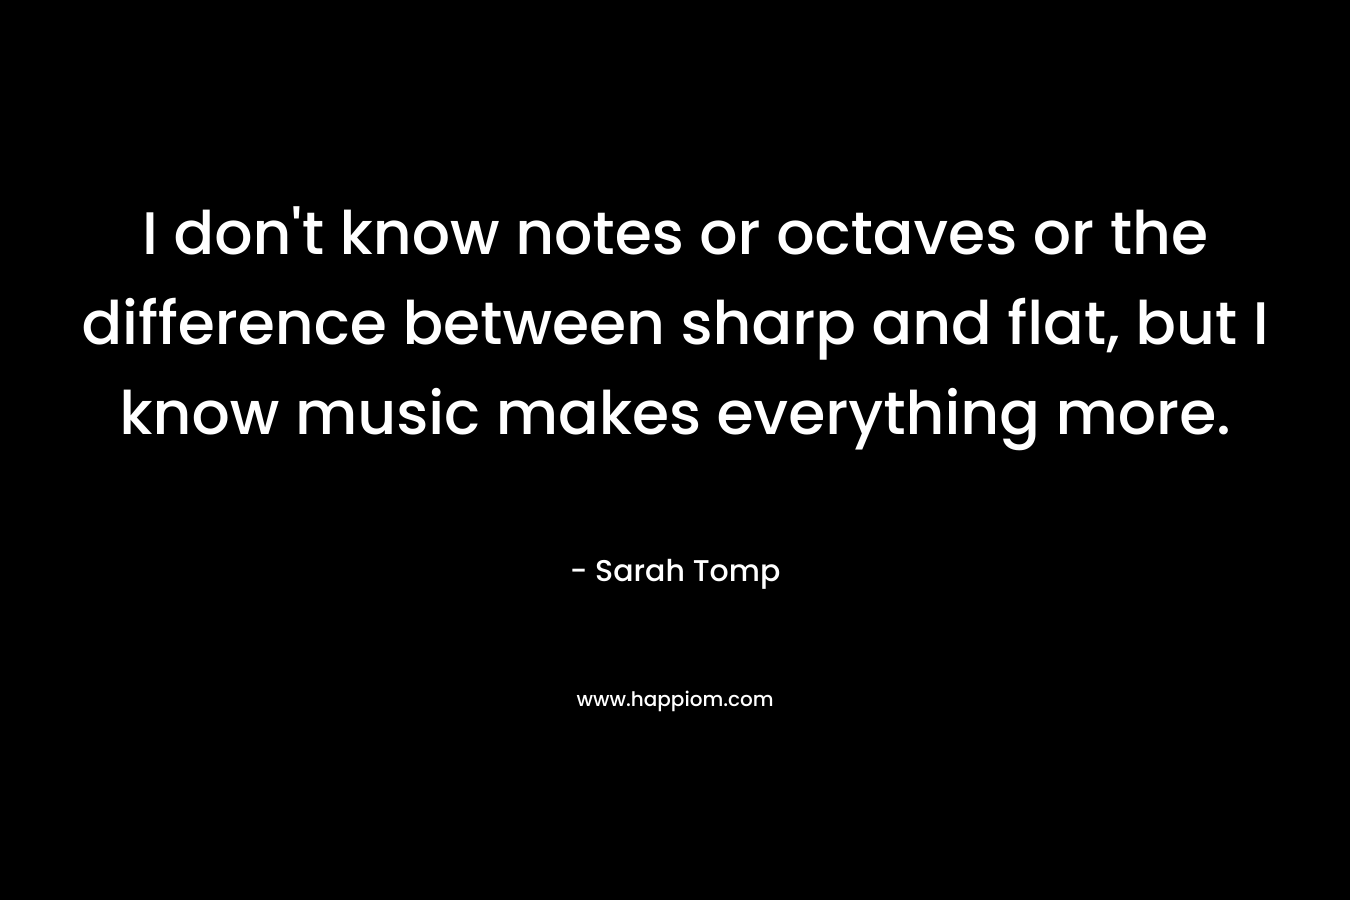 I don’t know notes or octaves or the difference between sharp and flat, but I know music makes everything more. – Sarah Tomp